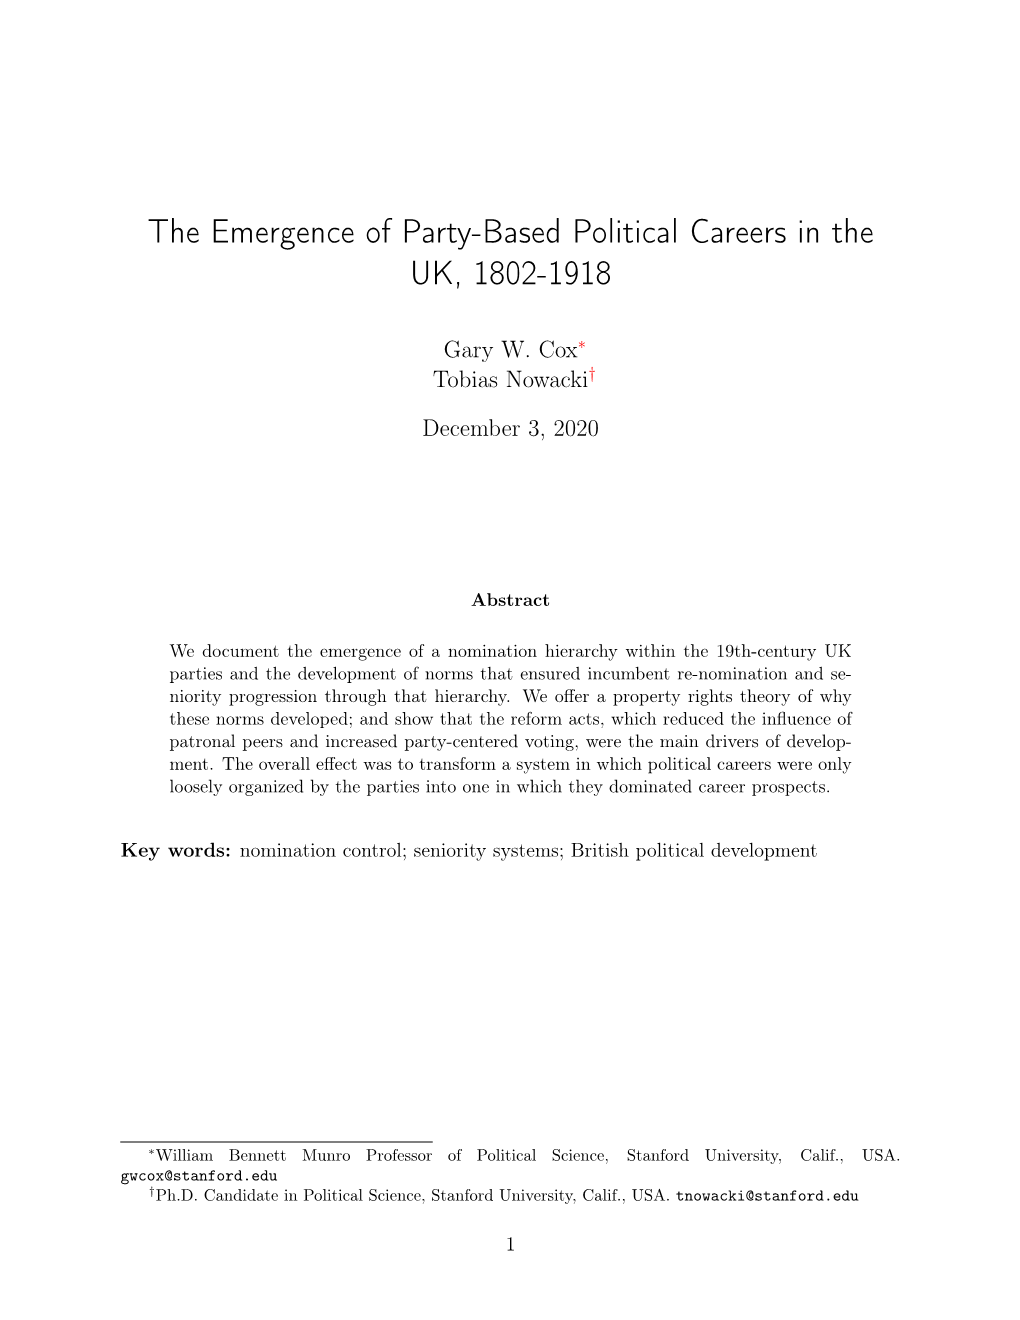 The Emergence of Party-Based Political Careers in the UK, 1802-1918